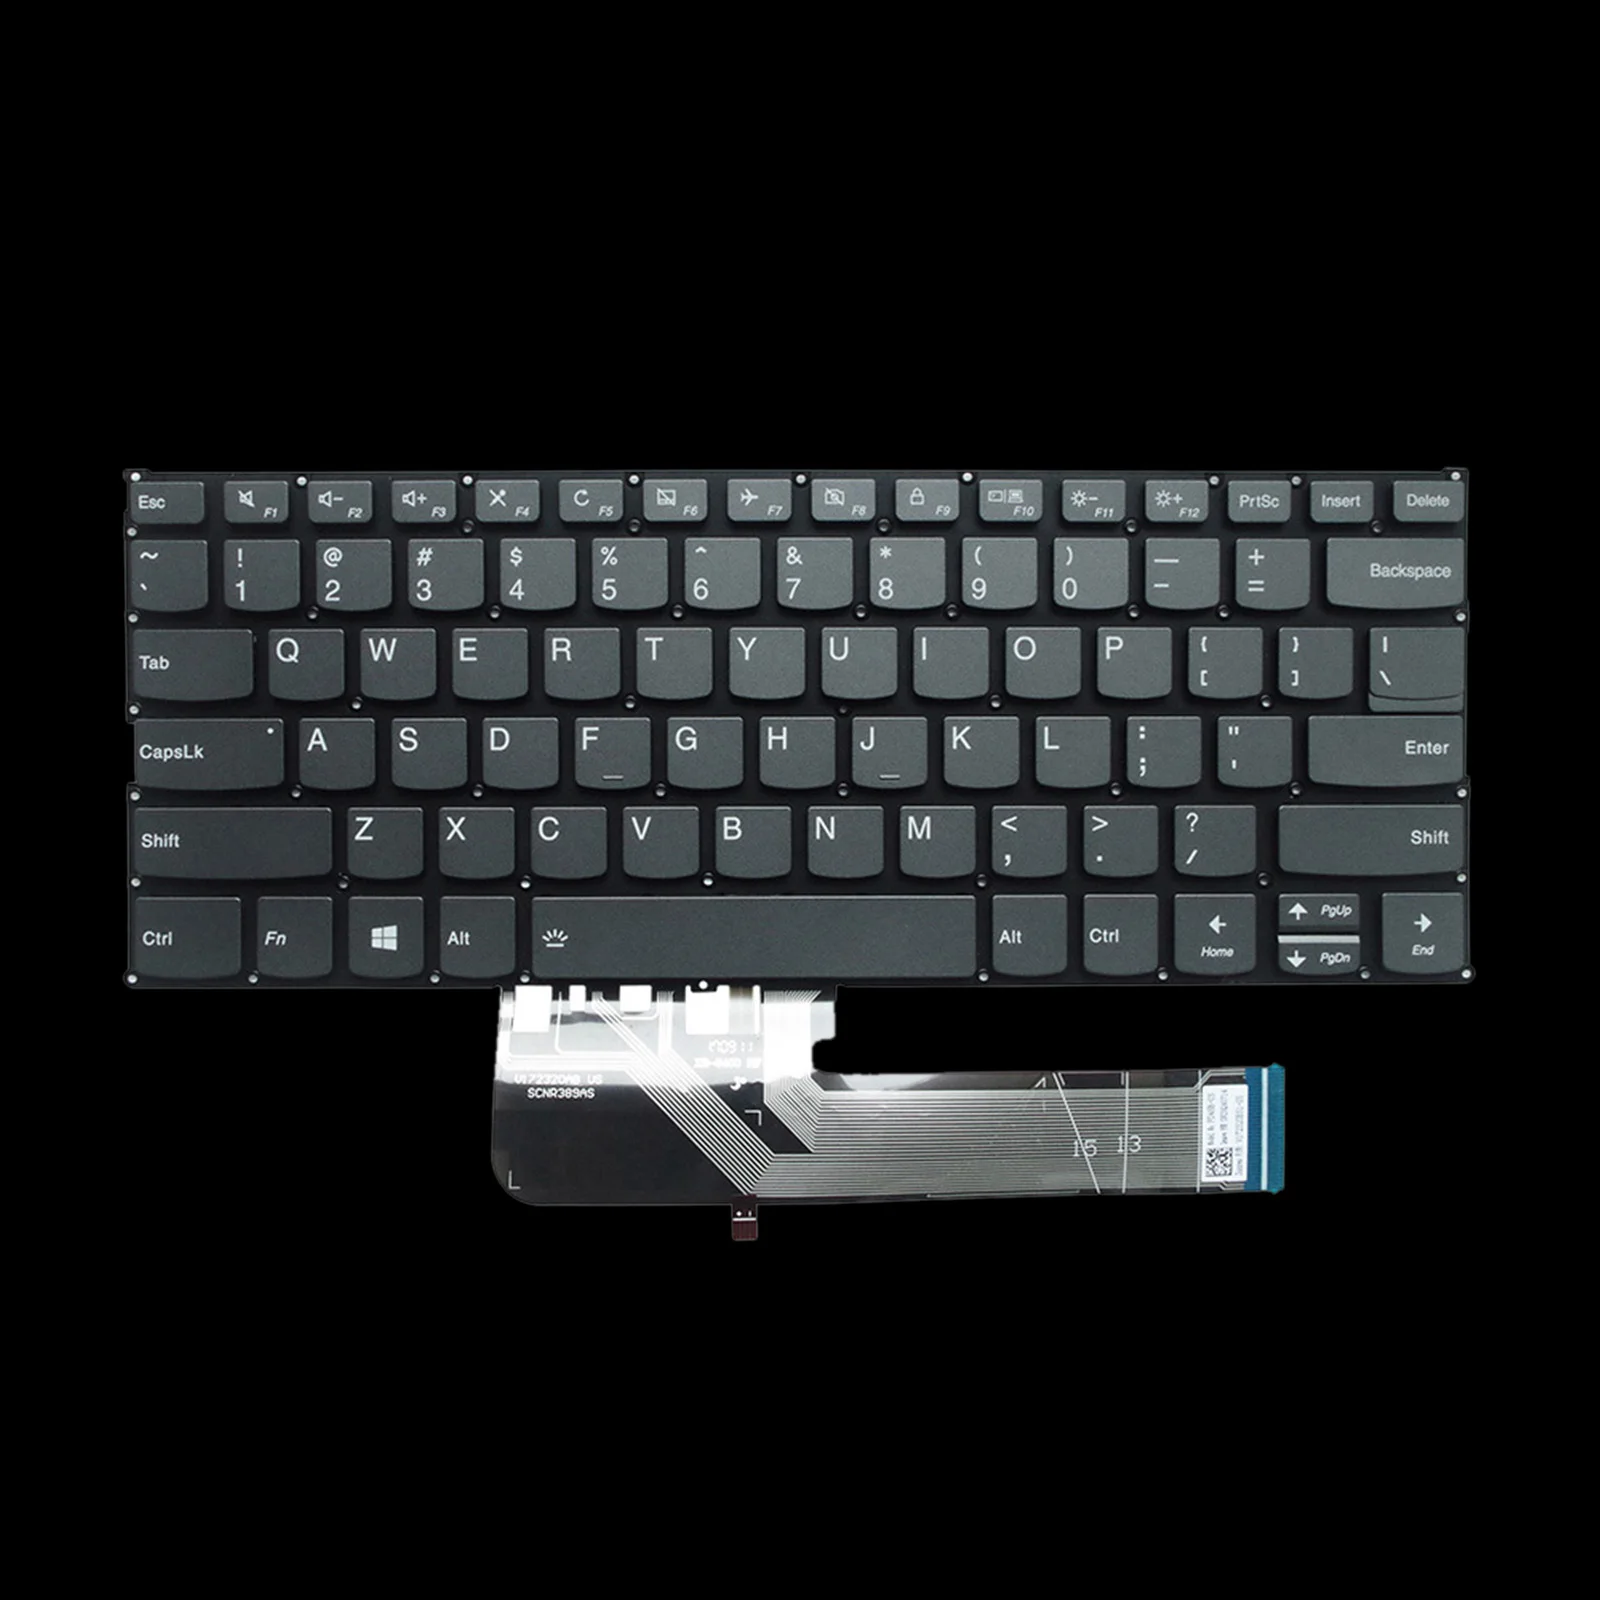 1pcs New Laptop Keyboard US Layout w/Backlight for  Yoga 530-14 530-14ARR, Each keyboard is tested before shipment and working.